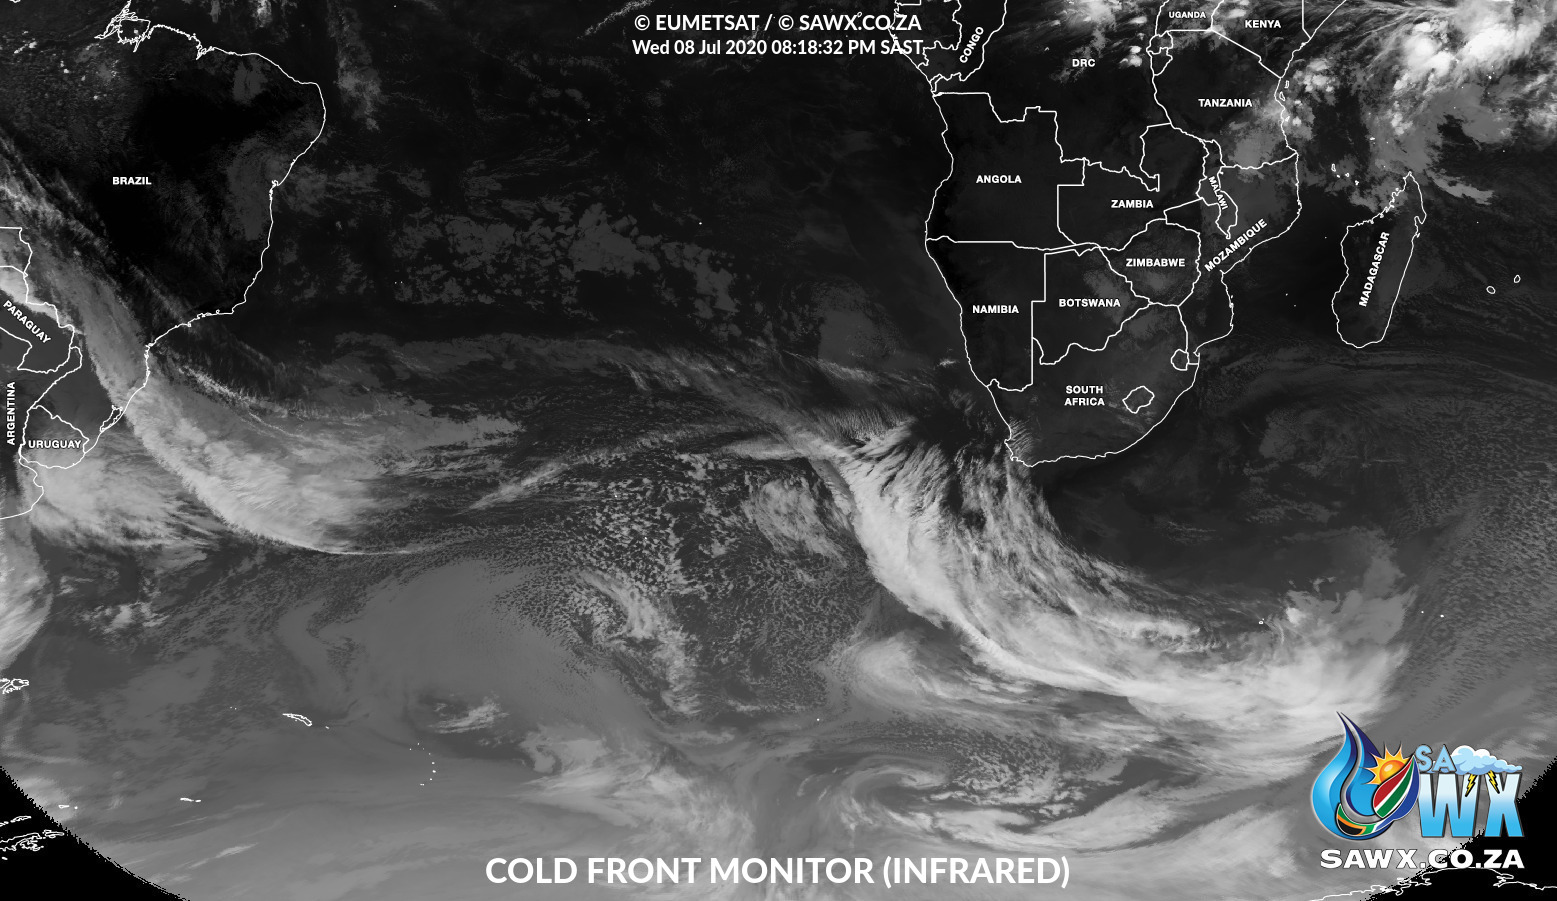 3 Cold Fronts to hit South Africa - Lesotho to see heaviest snowfall of all 16